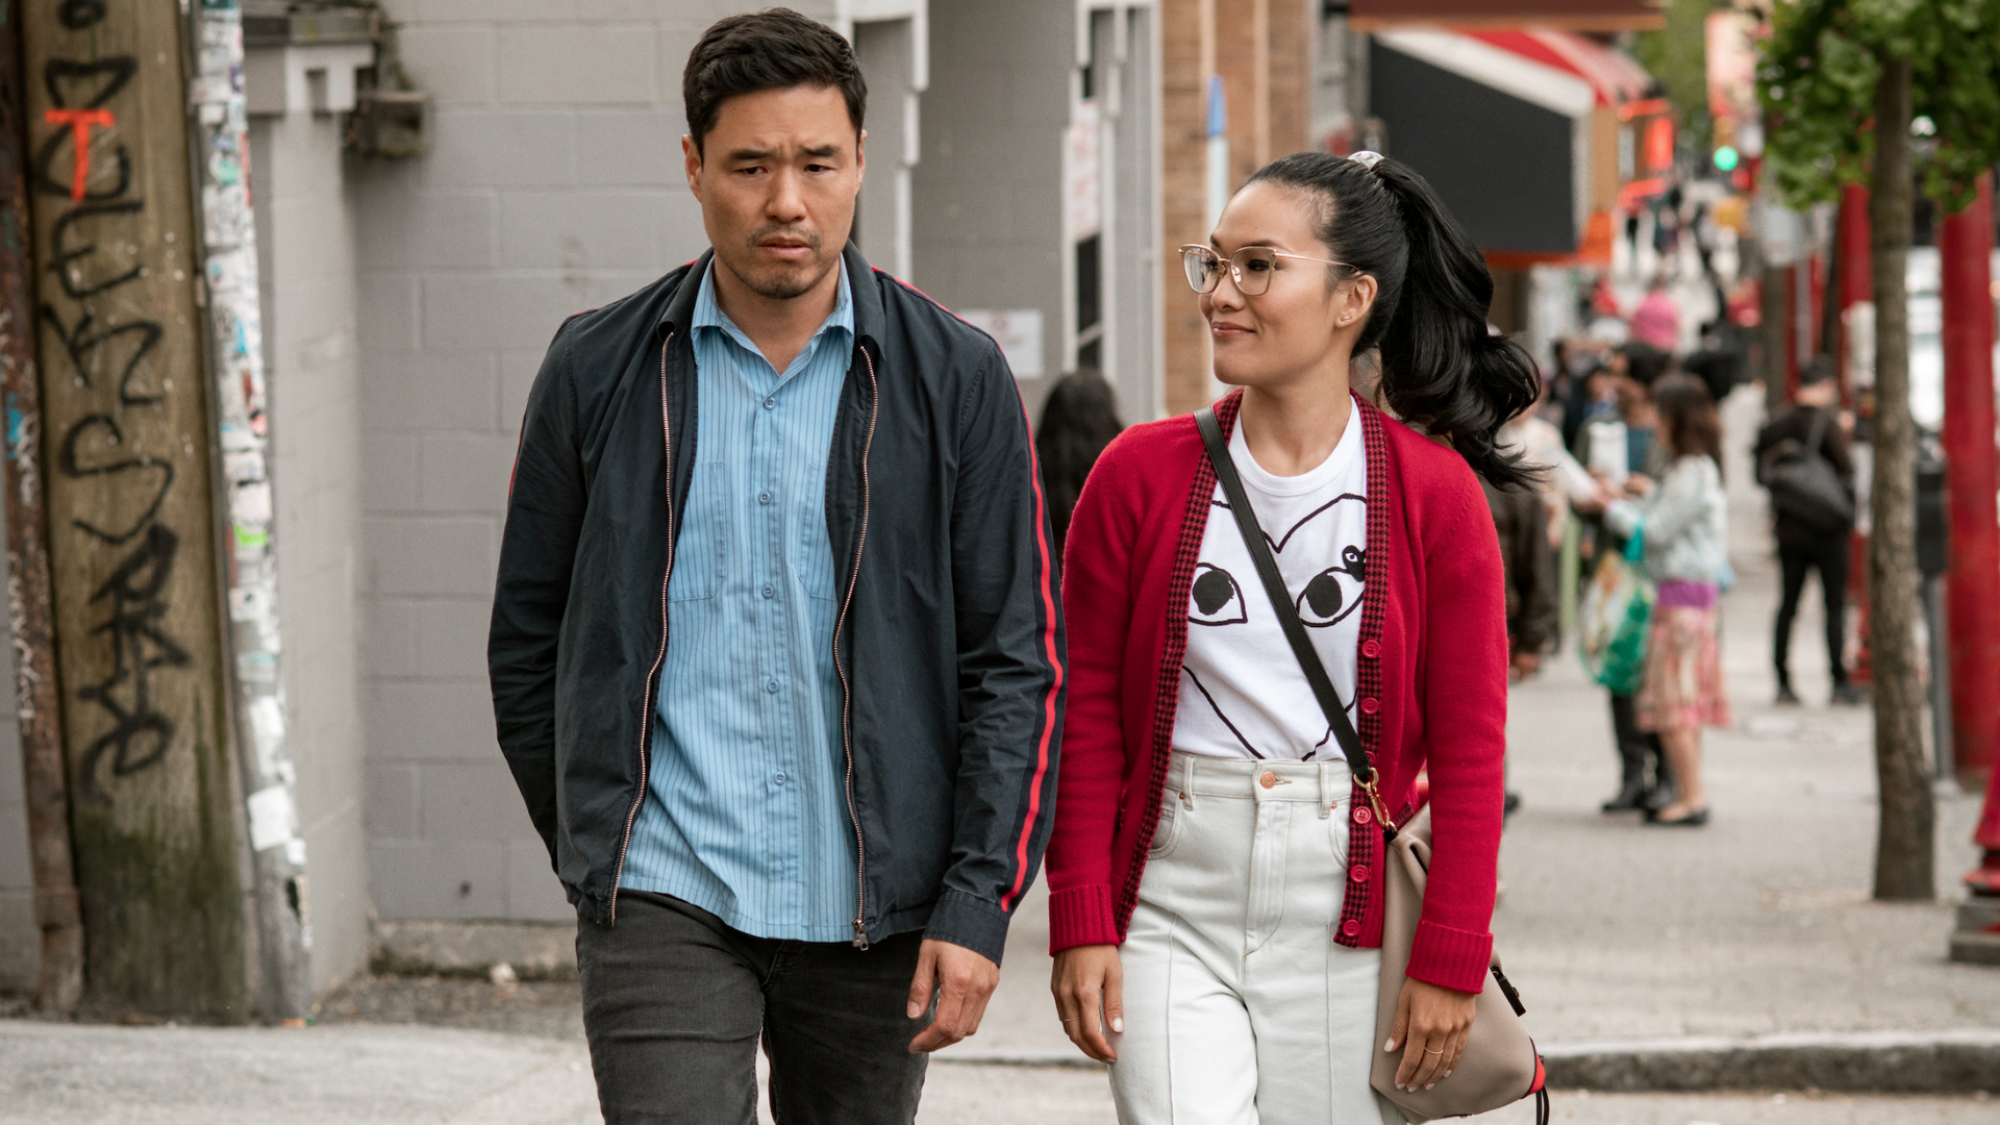 Randall Park and Ali Wong in "Always Be My Maybe"